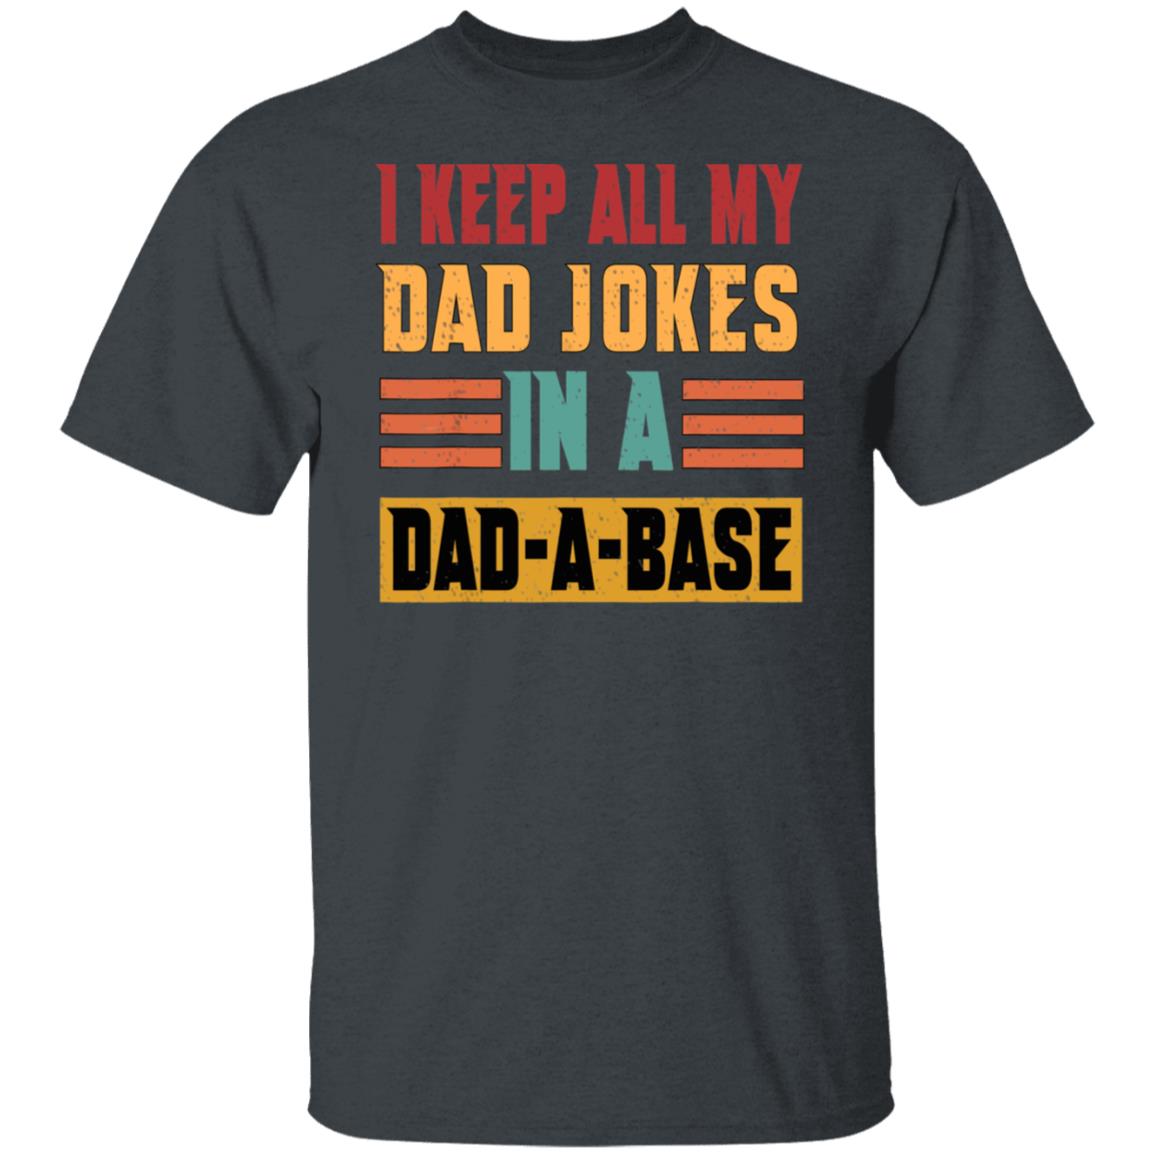 Vintage I Keep All My Dad Jokes In A Dad-a-base T-Shirt